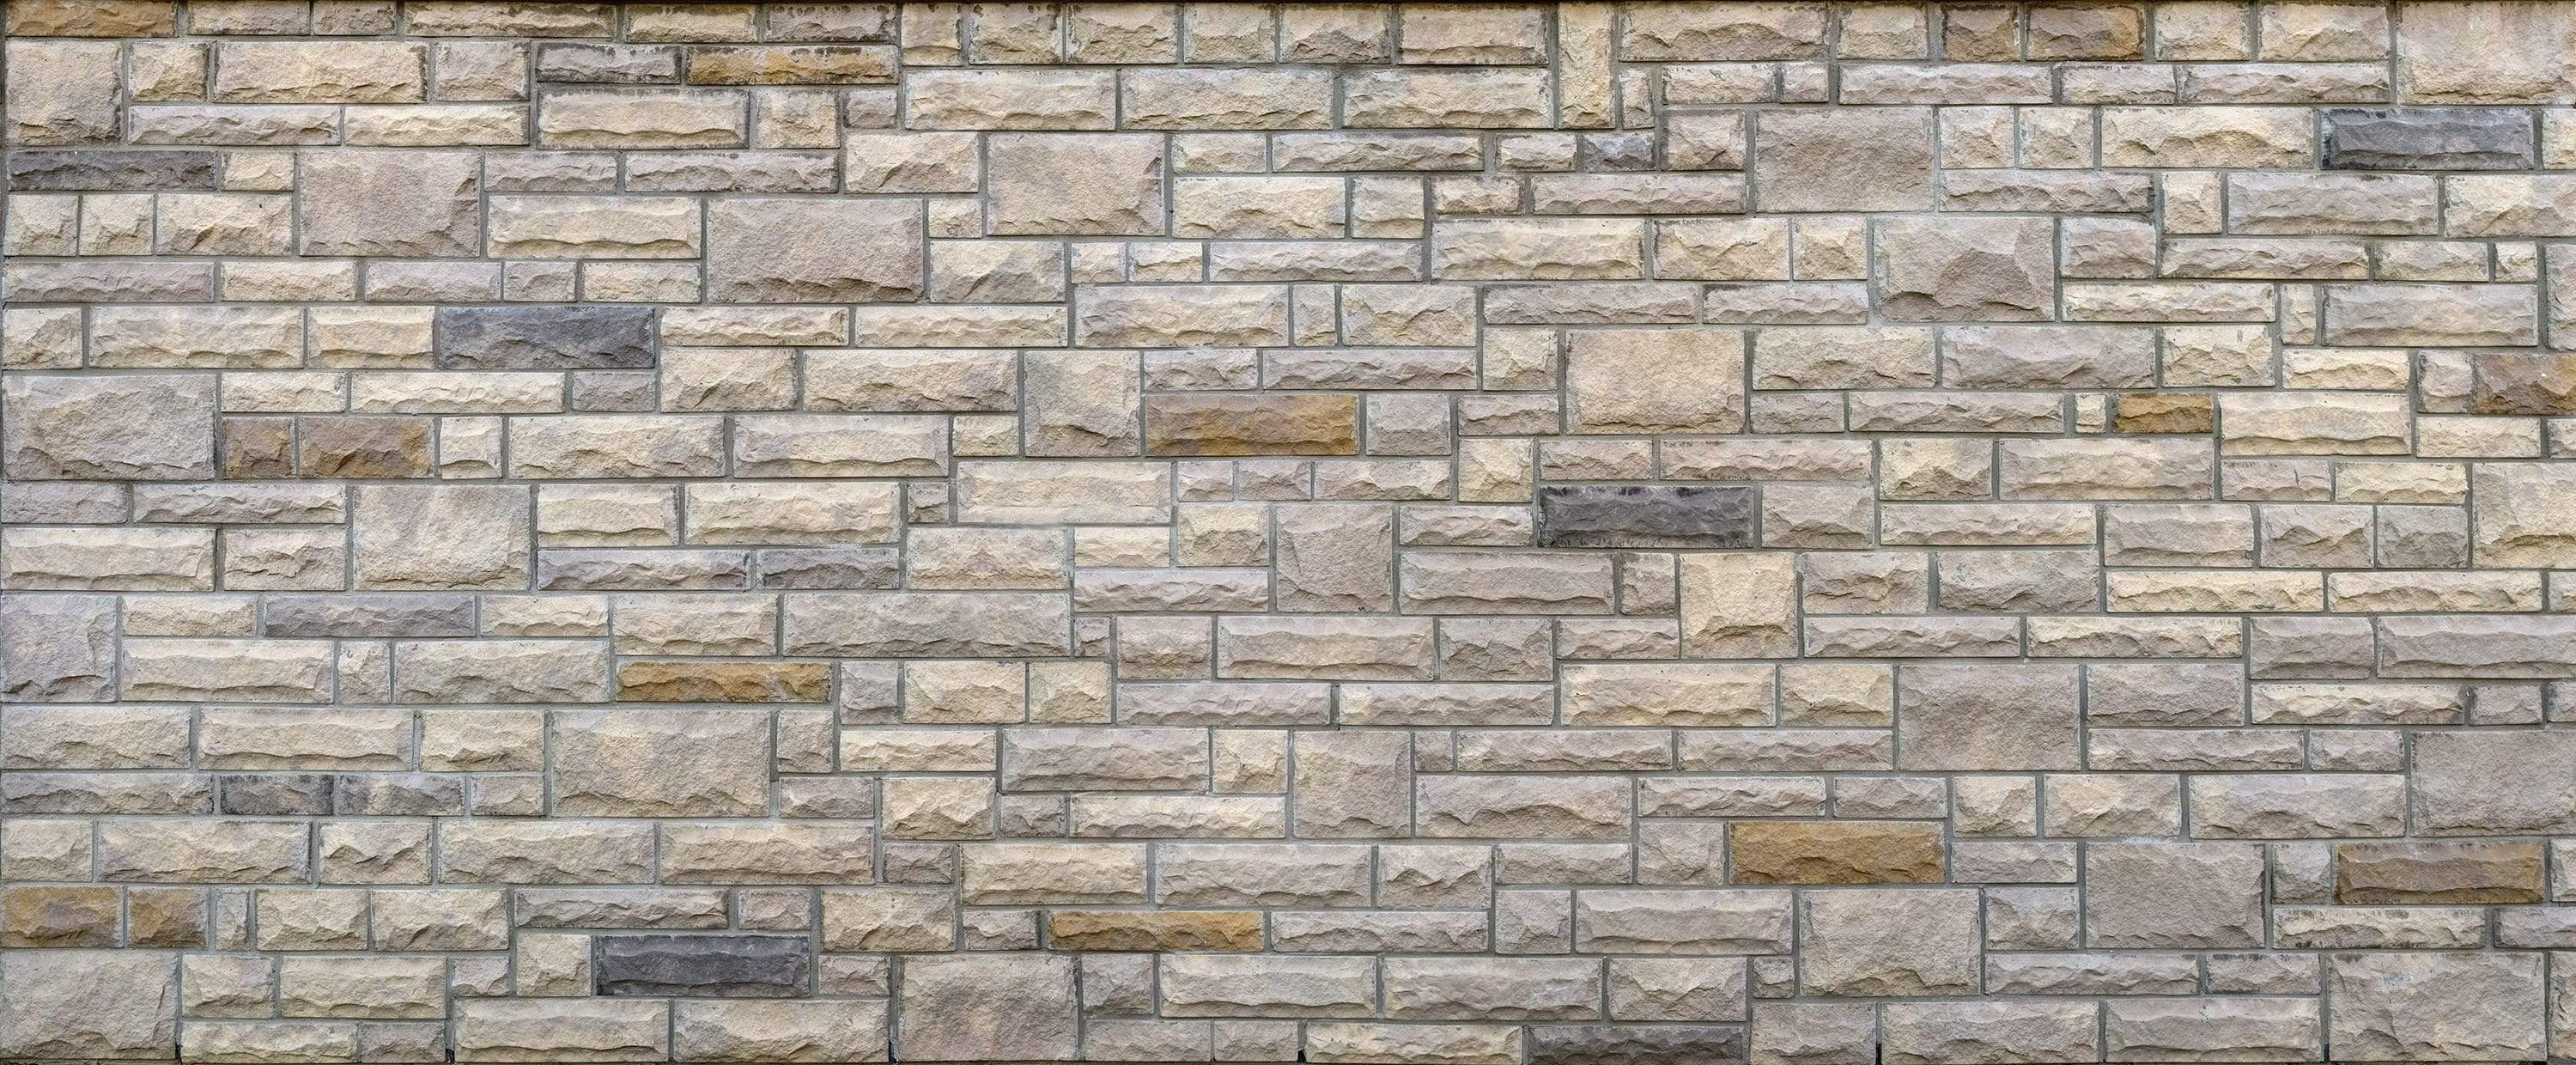 Big Bricks Wall Megapixel Image: Wallpaper, Peel-N-Stick and Removes Easily Anytime